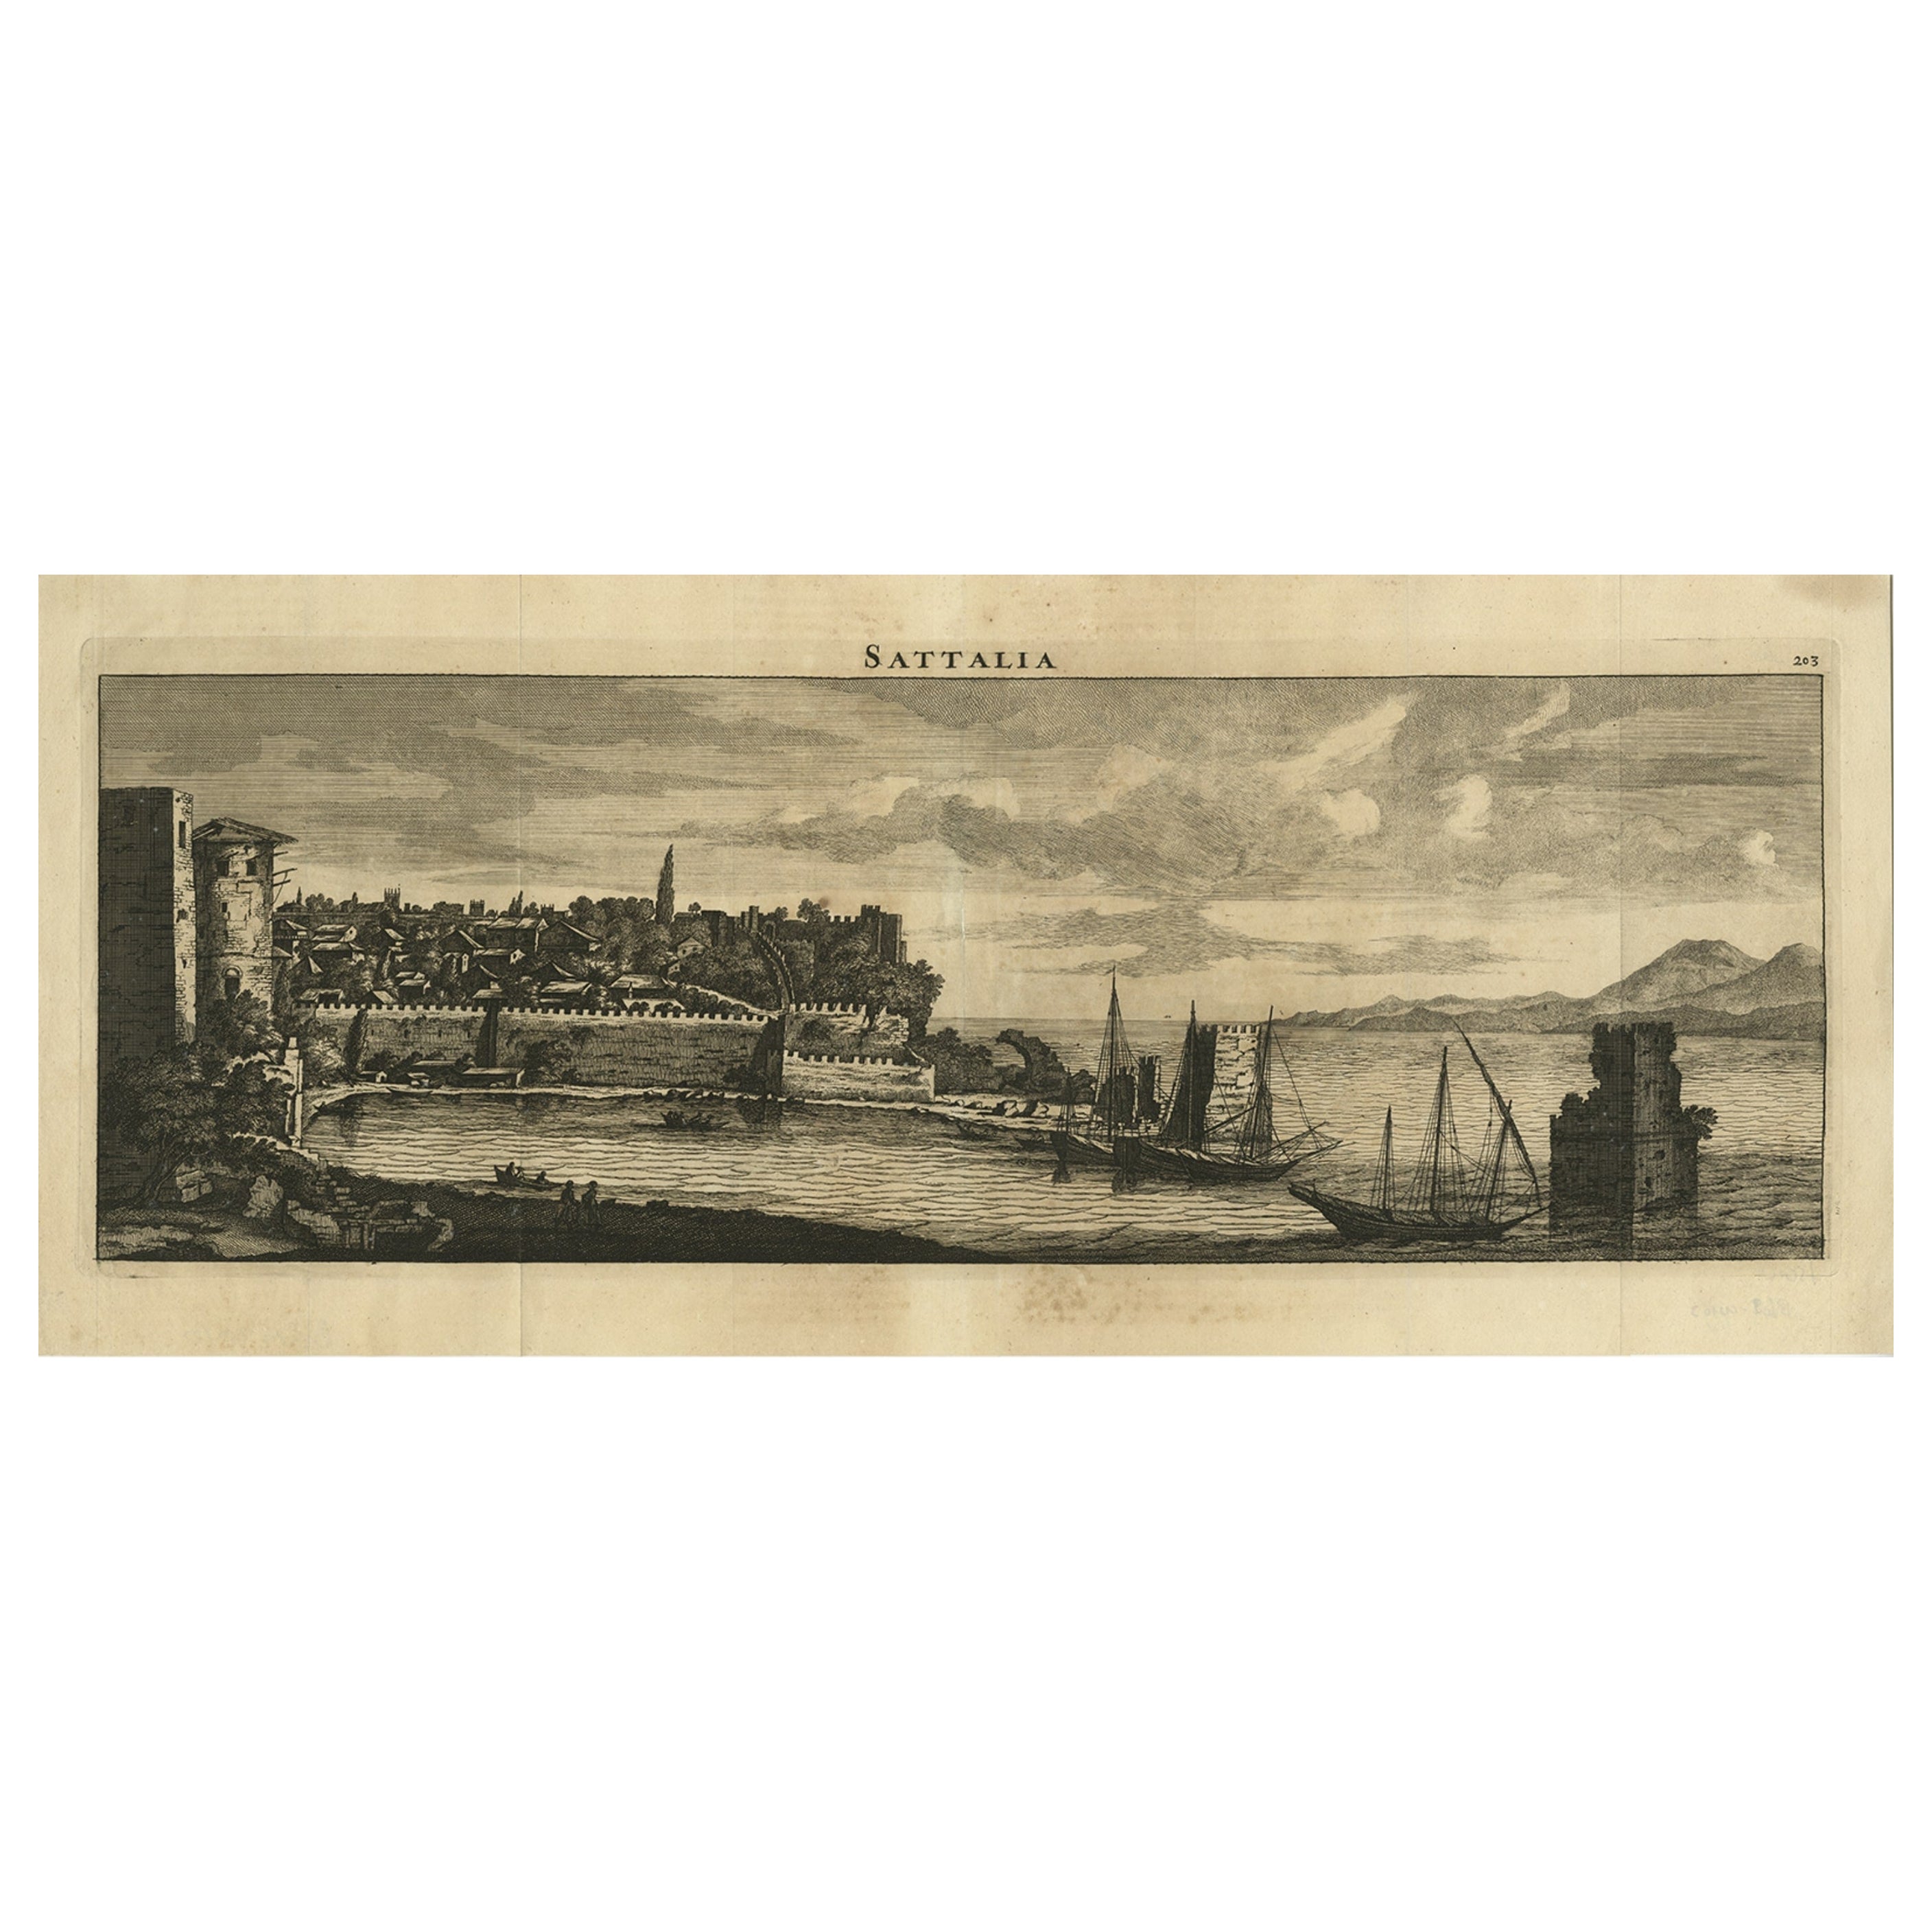 Engraving of Sattalia (Antalya, Turkey) an Important City of the Ottoman Empire For Sale